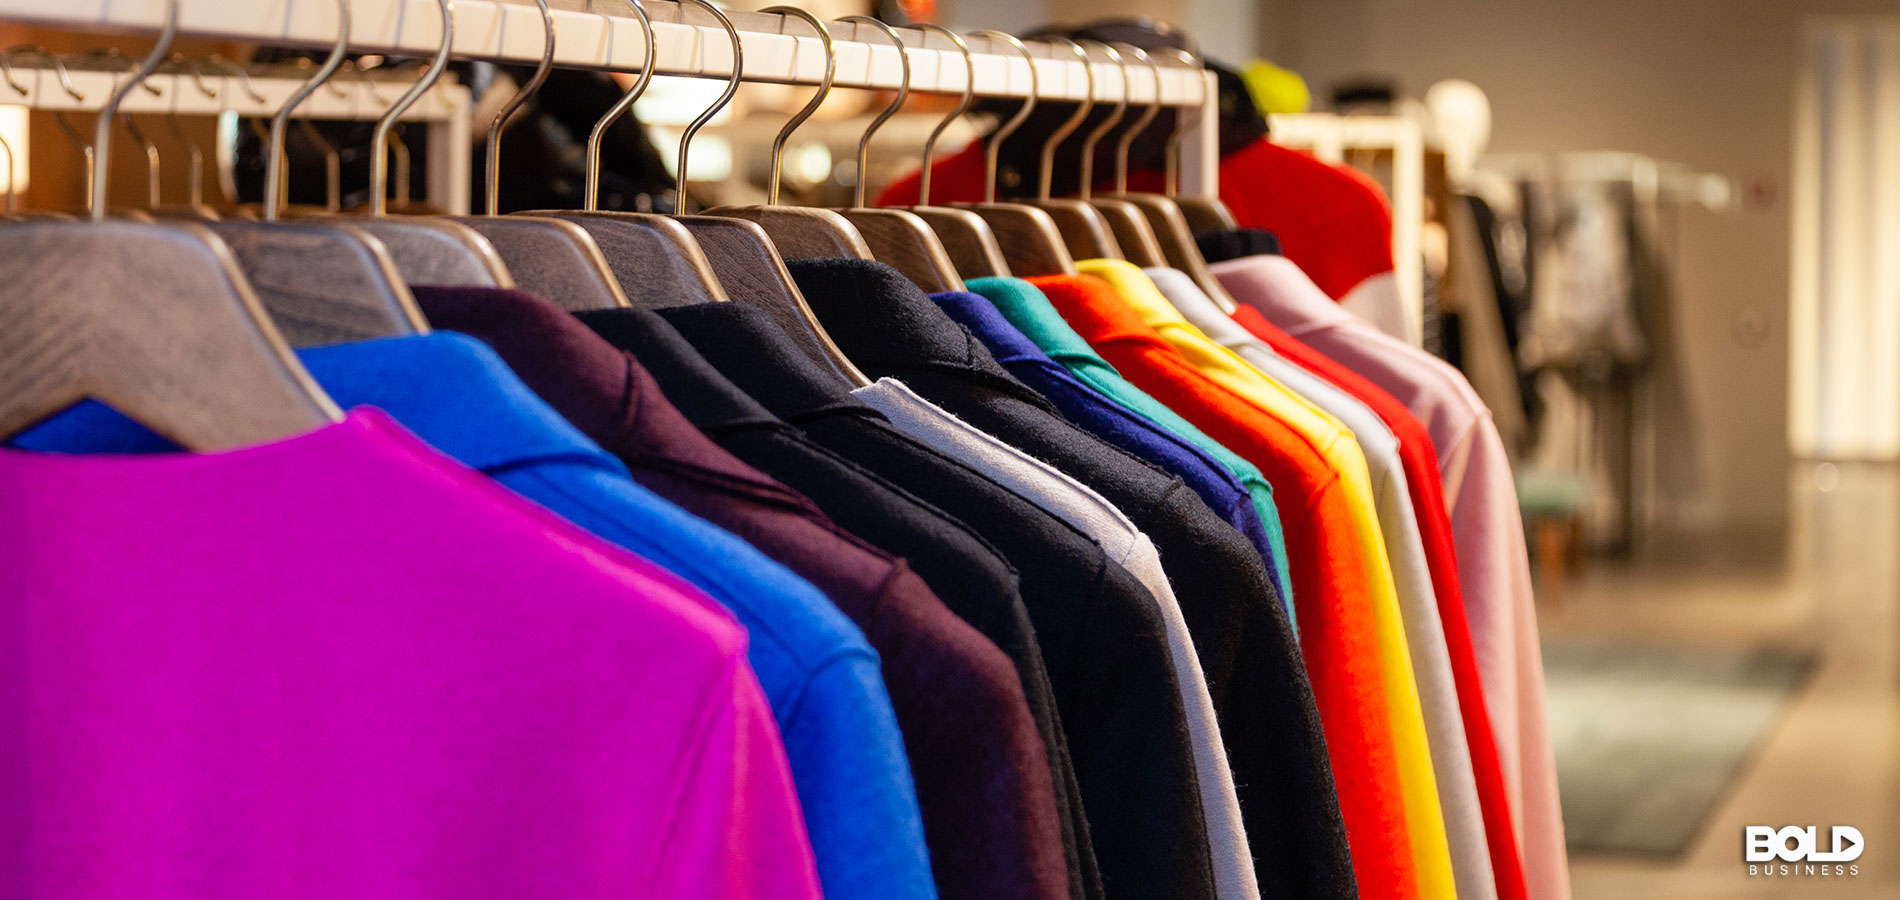 Coloring Your Own Clothes In-Store? – Dyeing Innovations Could Make This a Reality